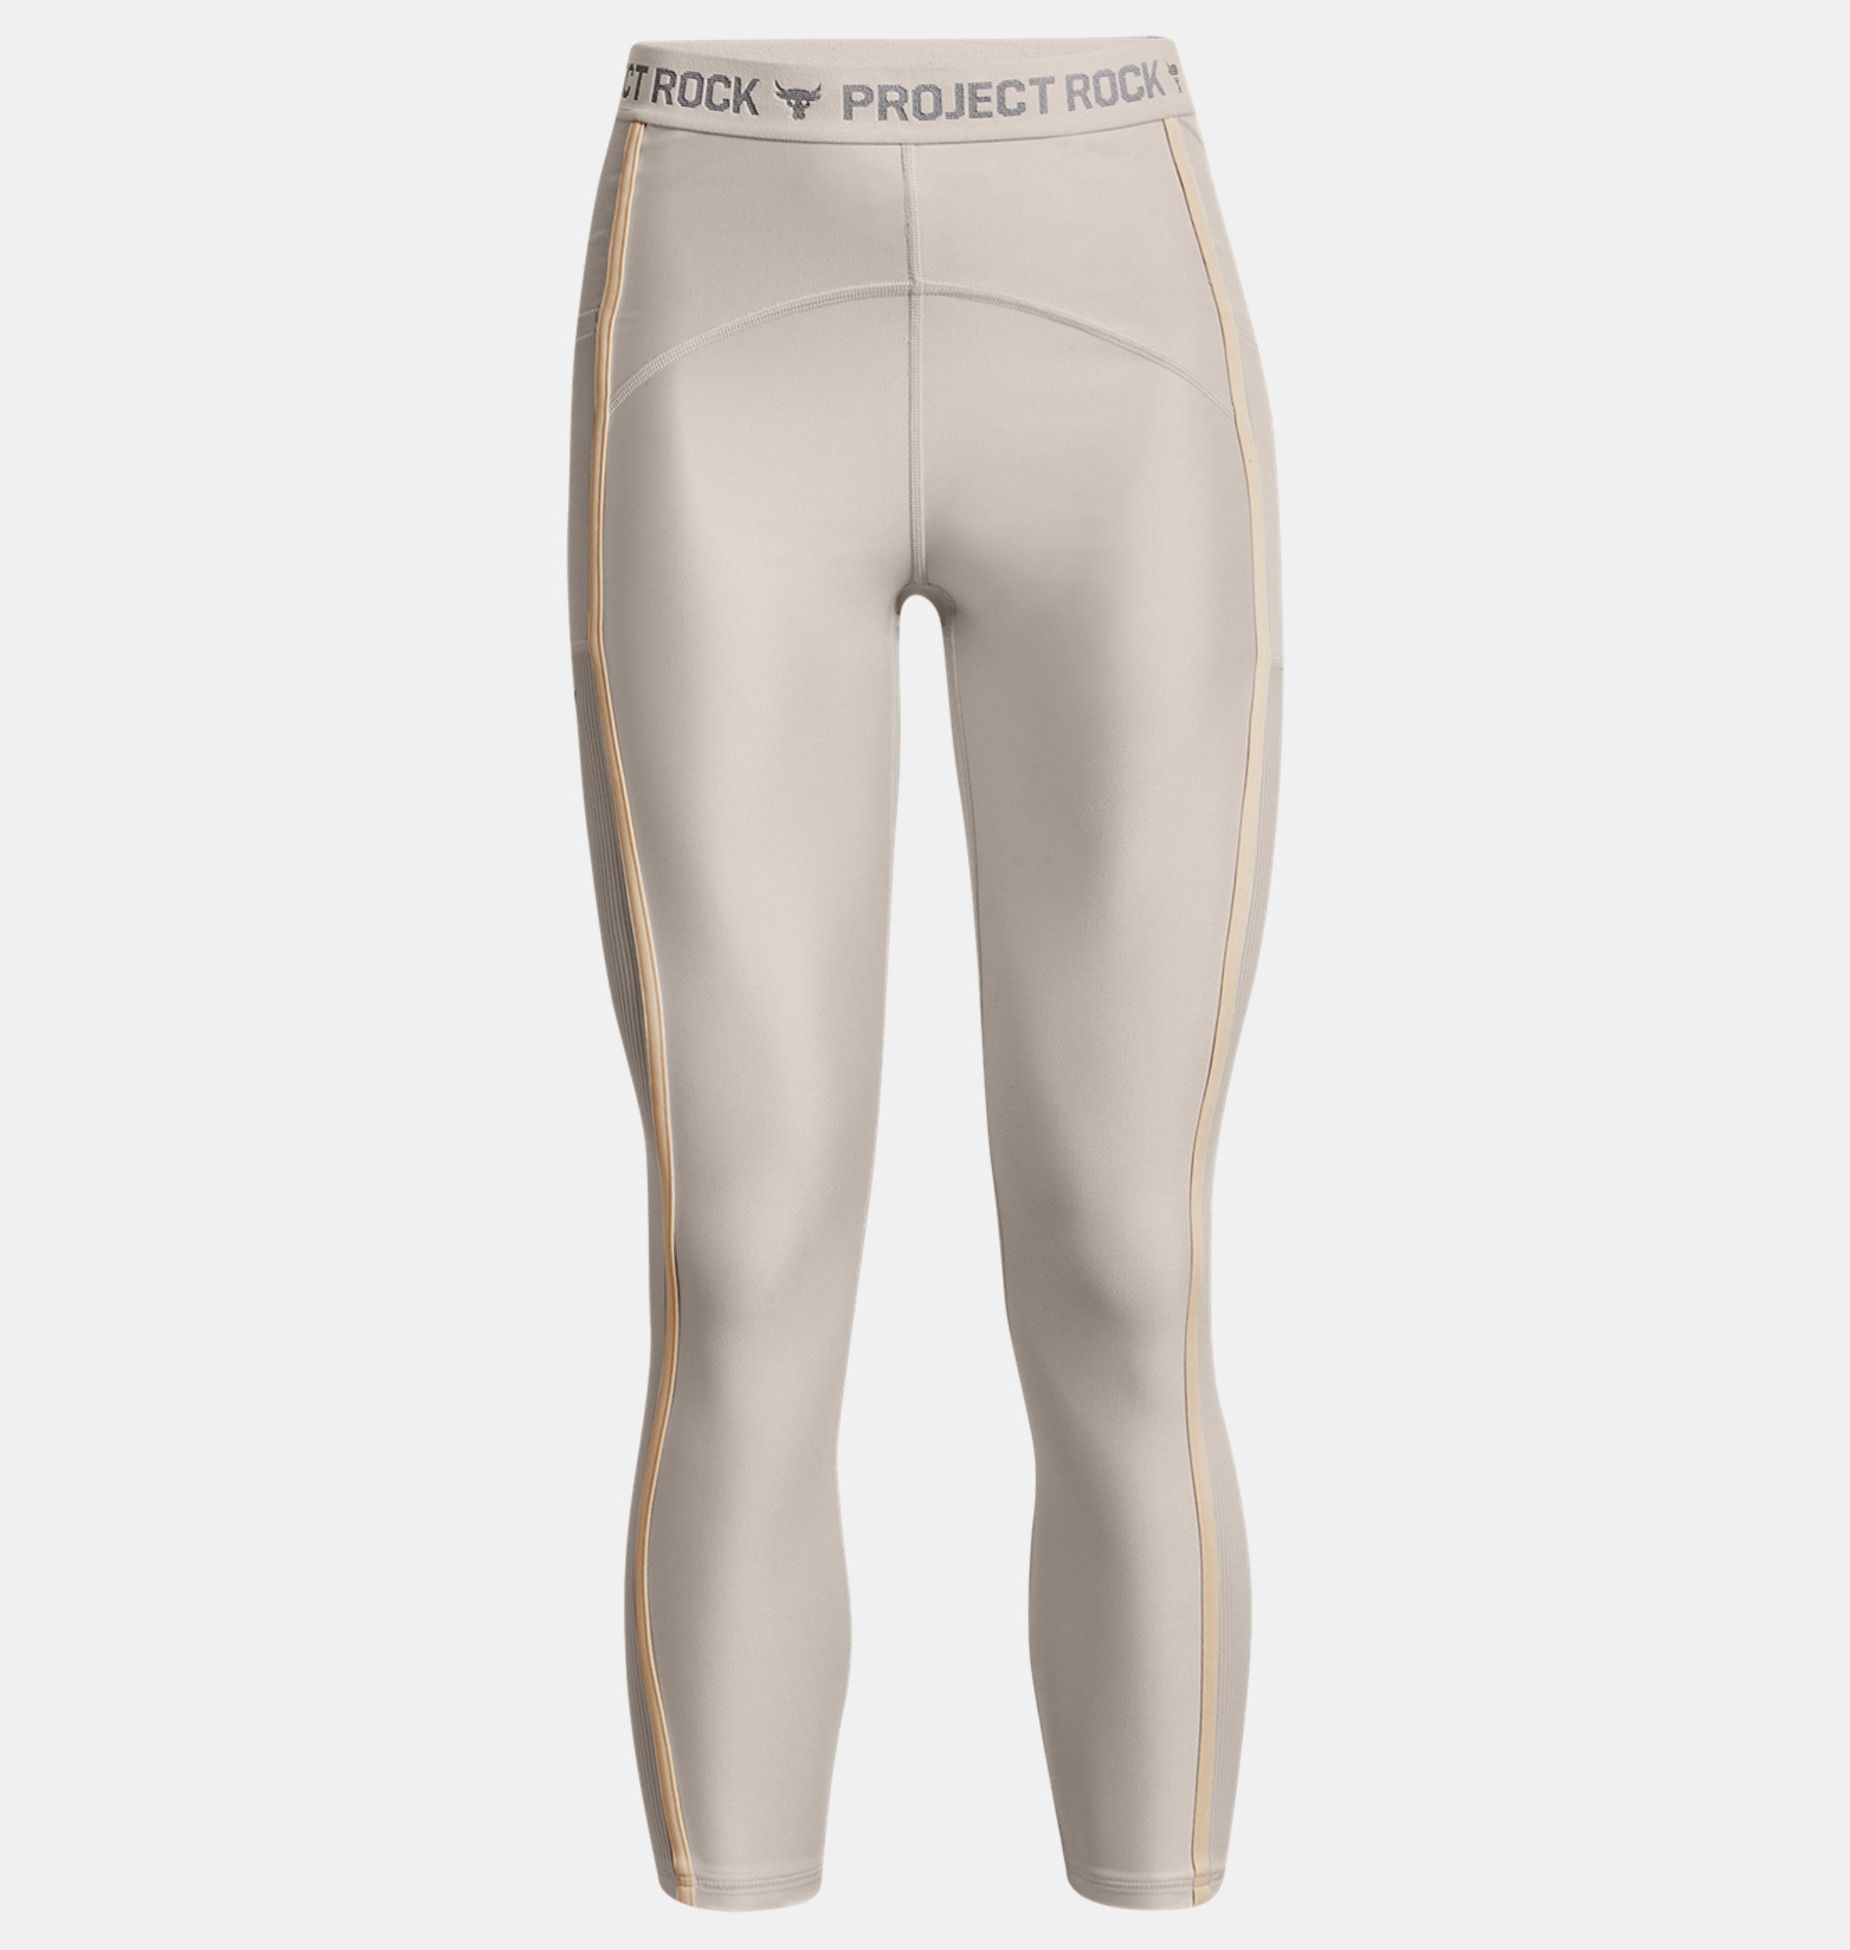 Clothing -  under armour Project Rock HeatGear Ankle Leggings